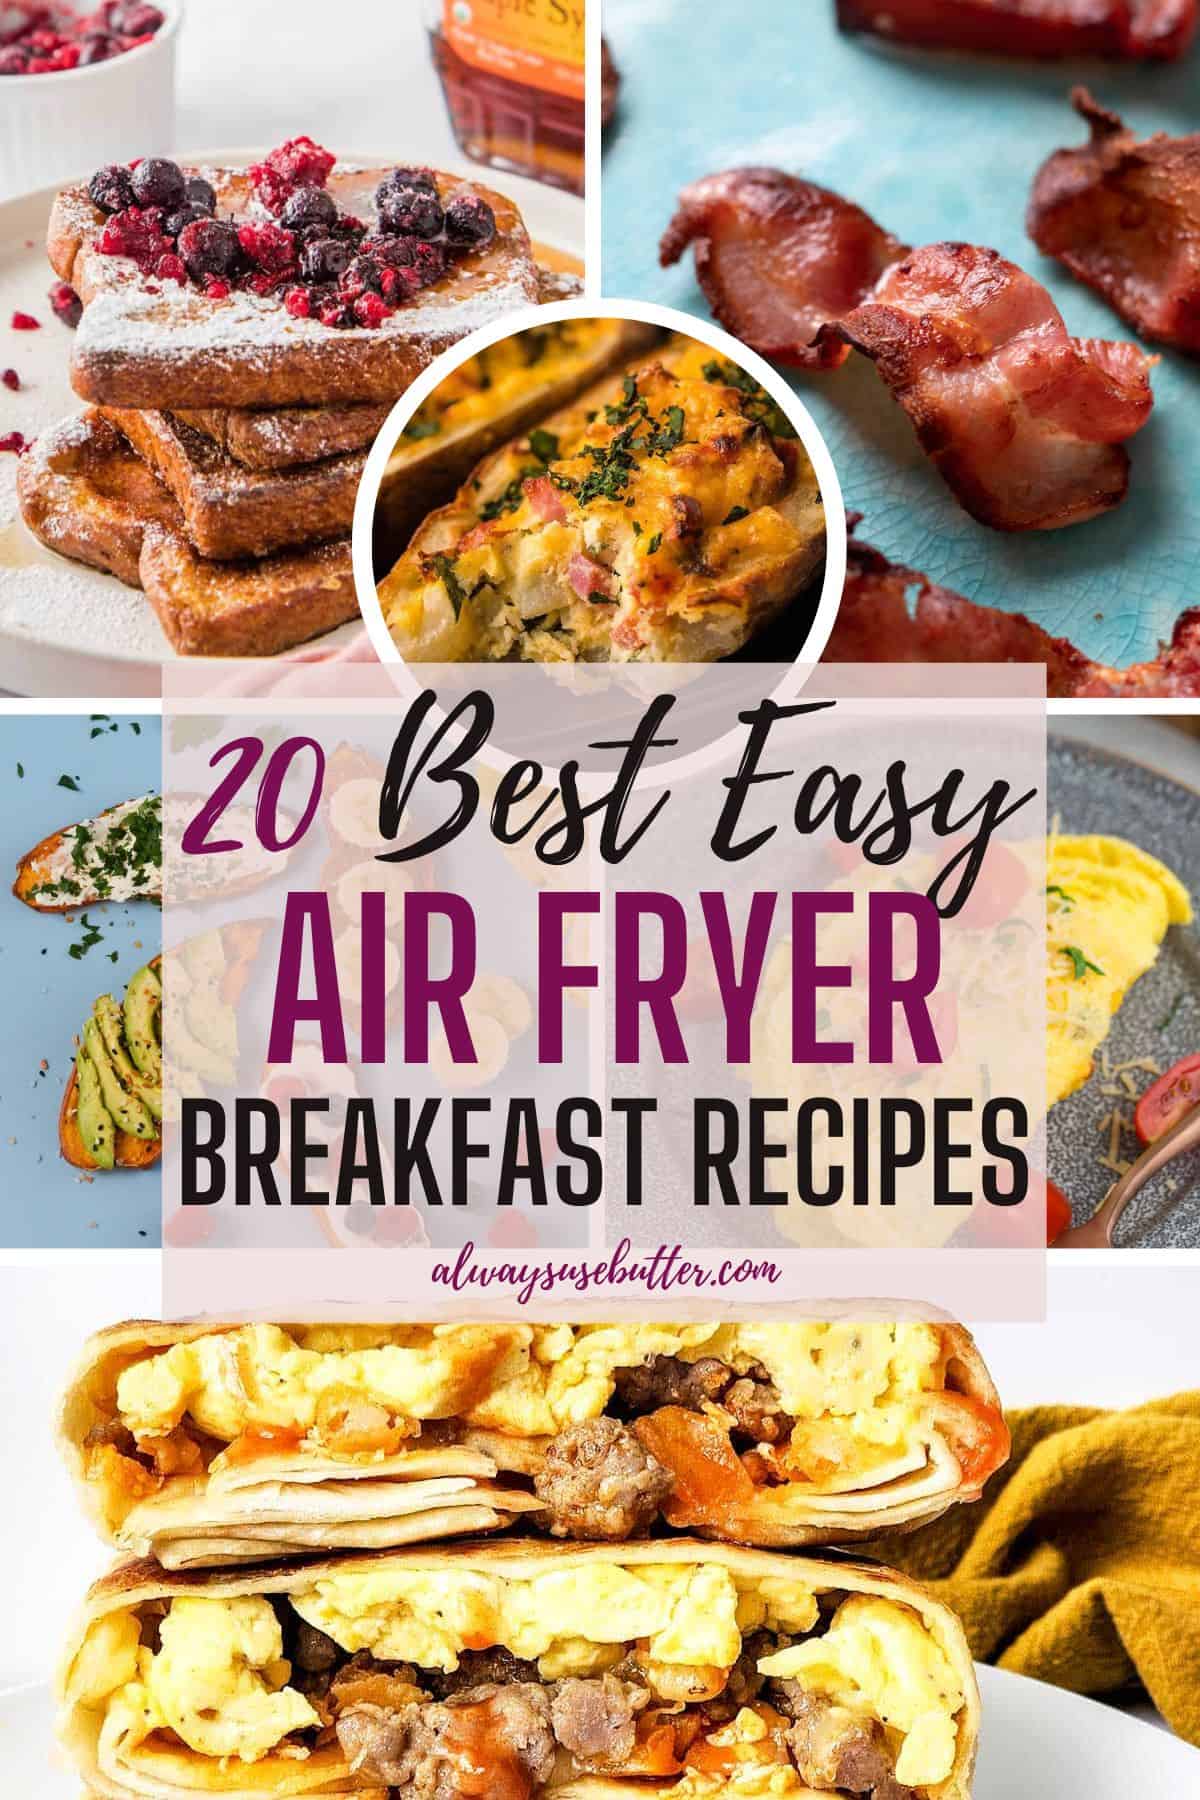 A collage showing a variety of air fryer breakfast recipes with text overlay.